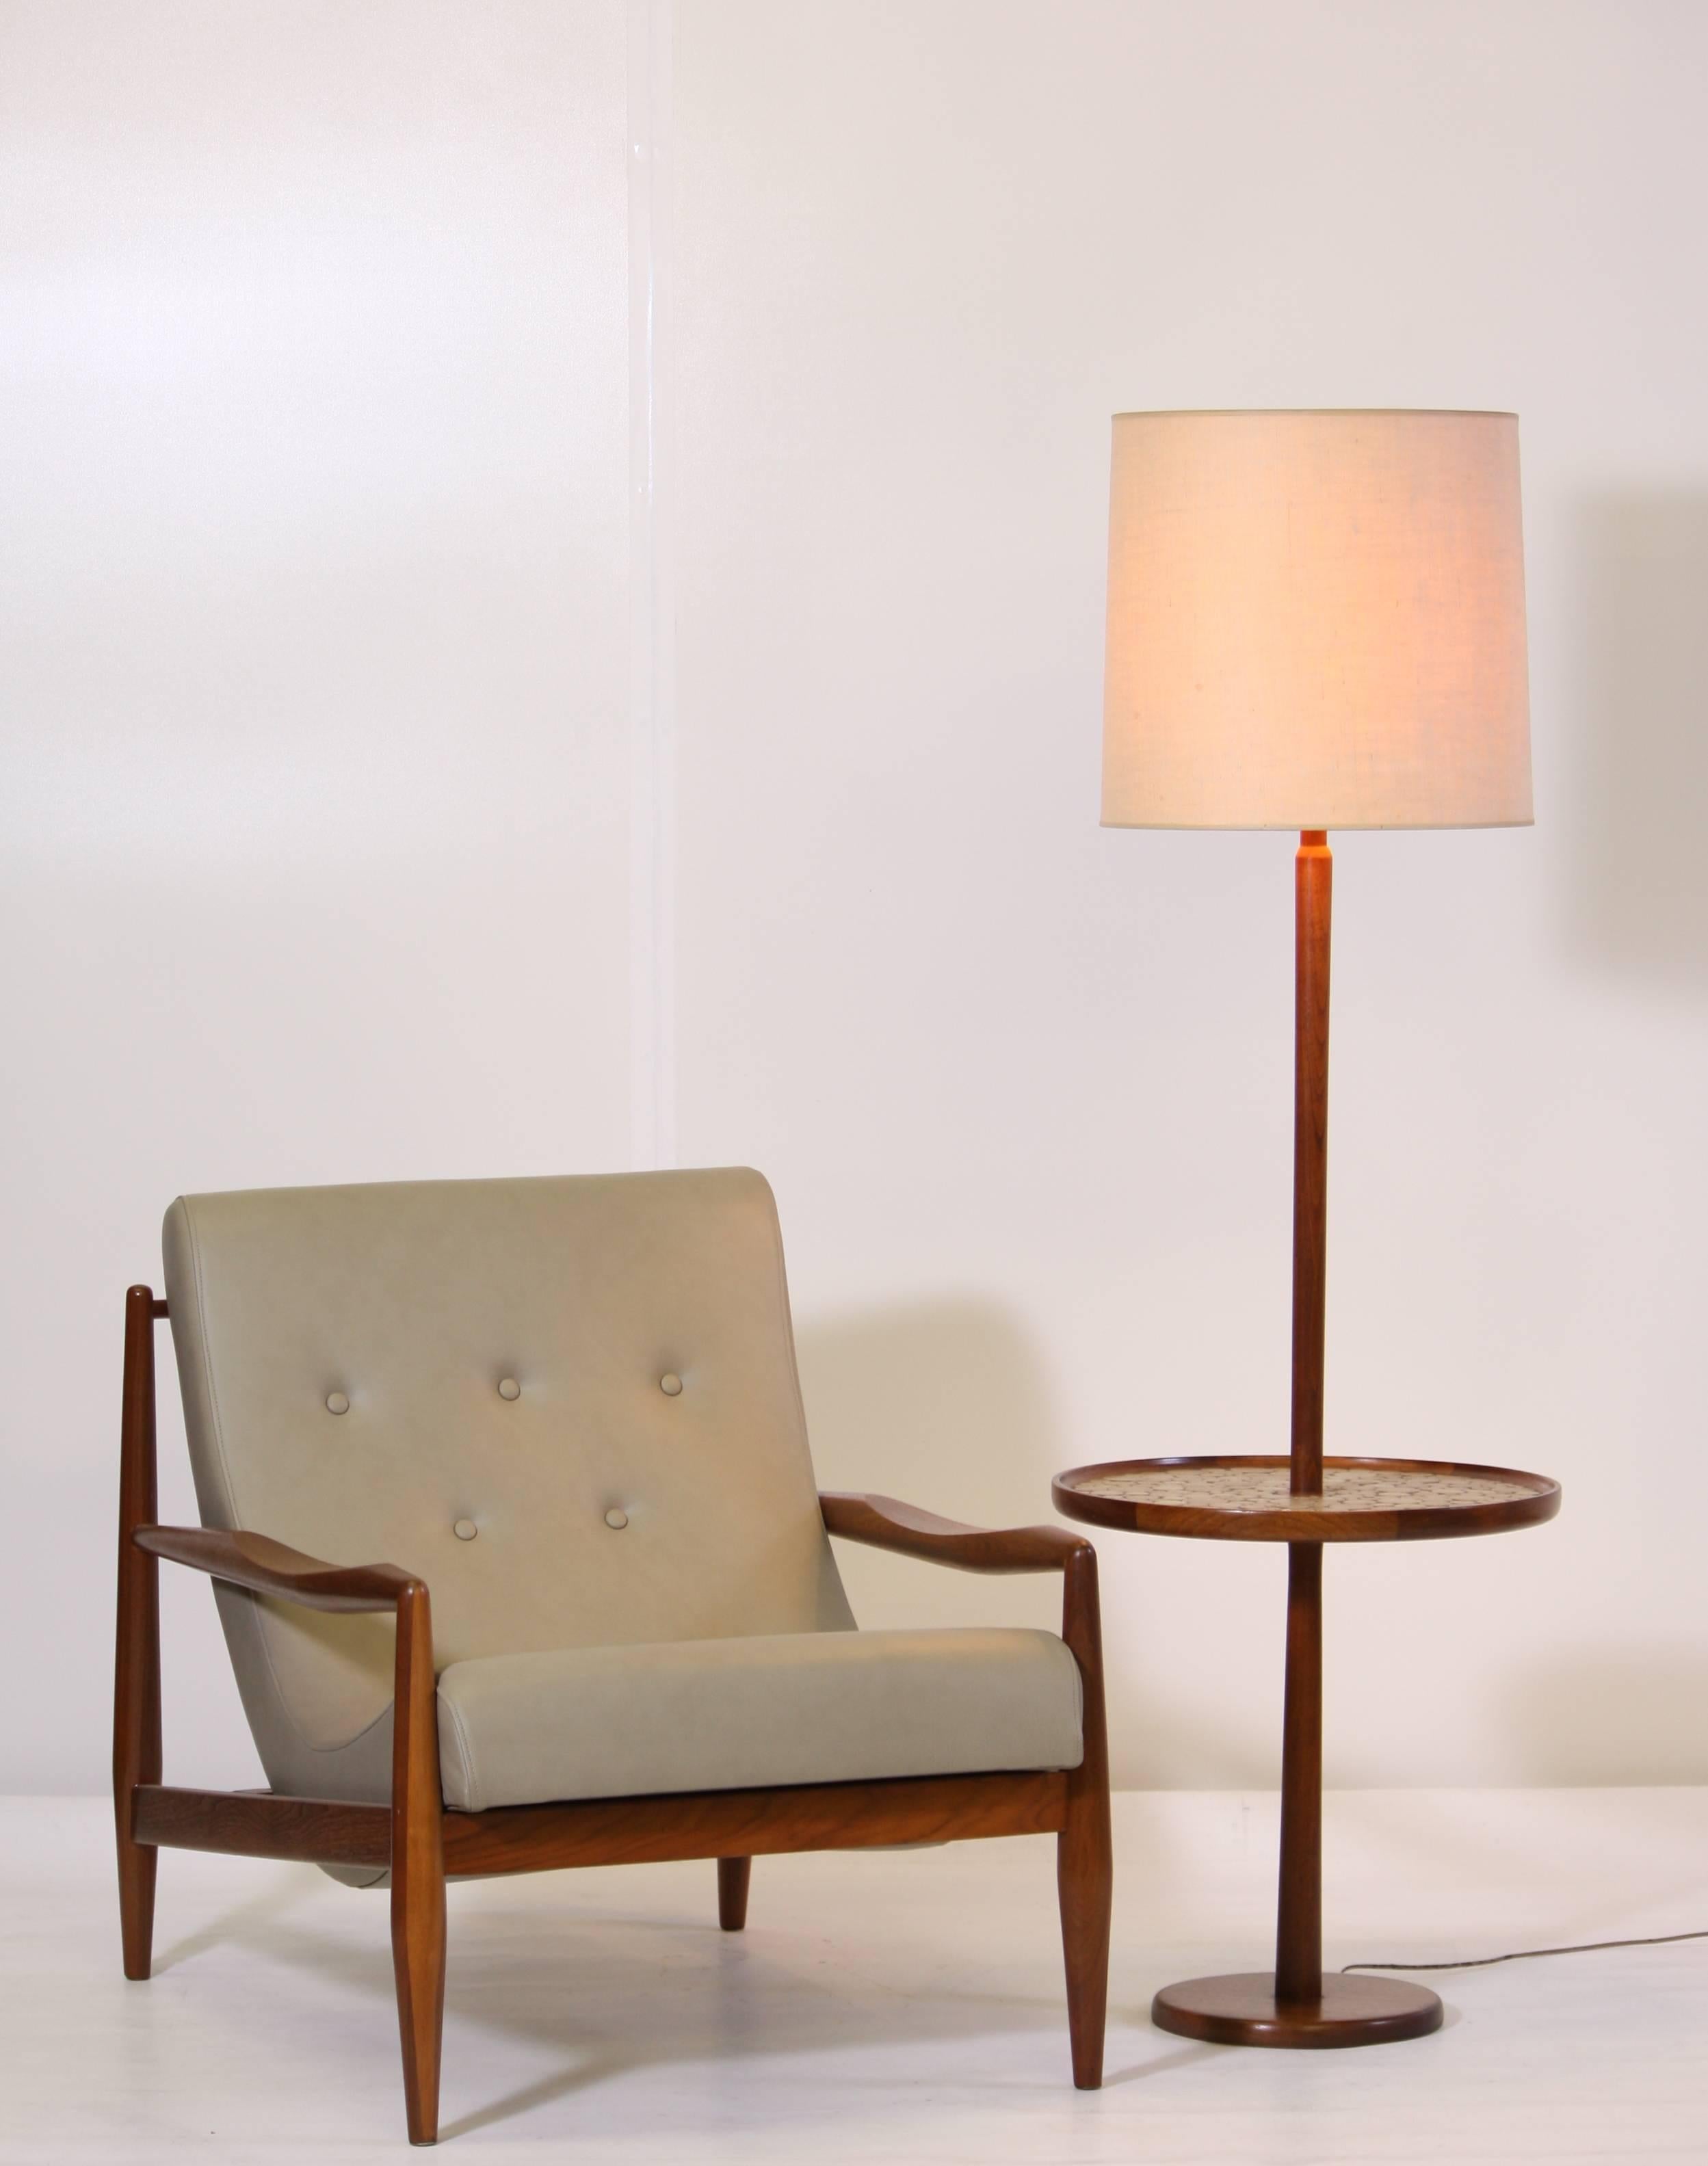 Amazingly crafted midcentury tile top table lamp by Gordon and Jane Martz. Retains original shade and finial. From the curated collection Space 20th Century Modern.